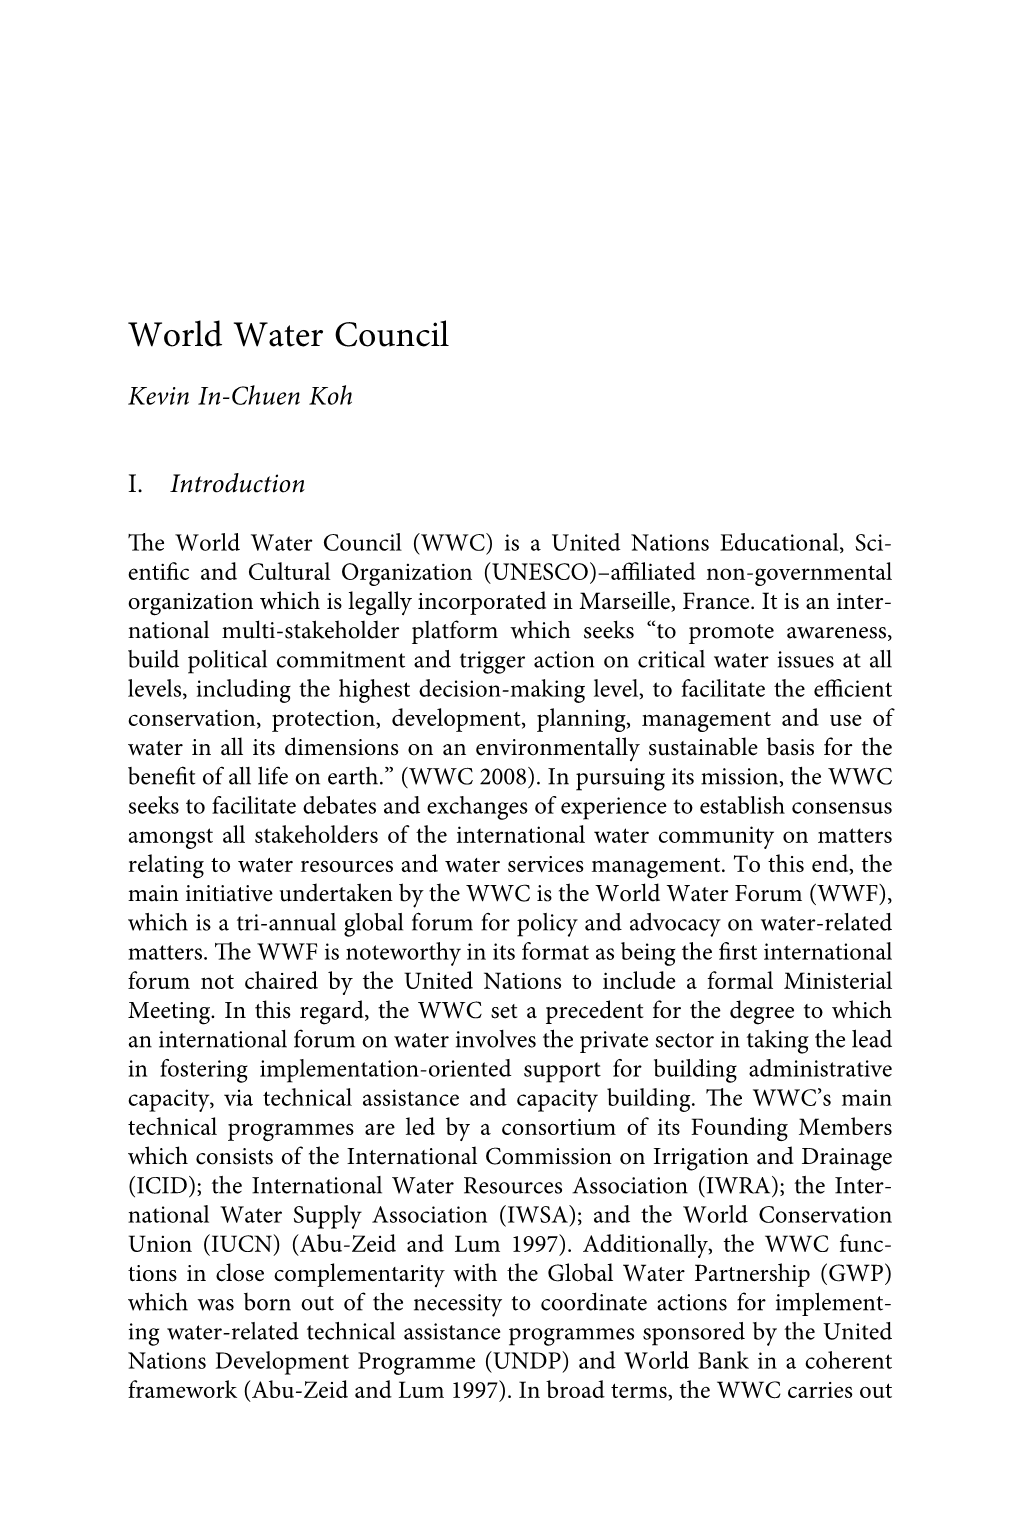 World Water Council